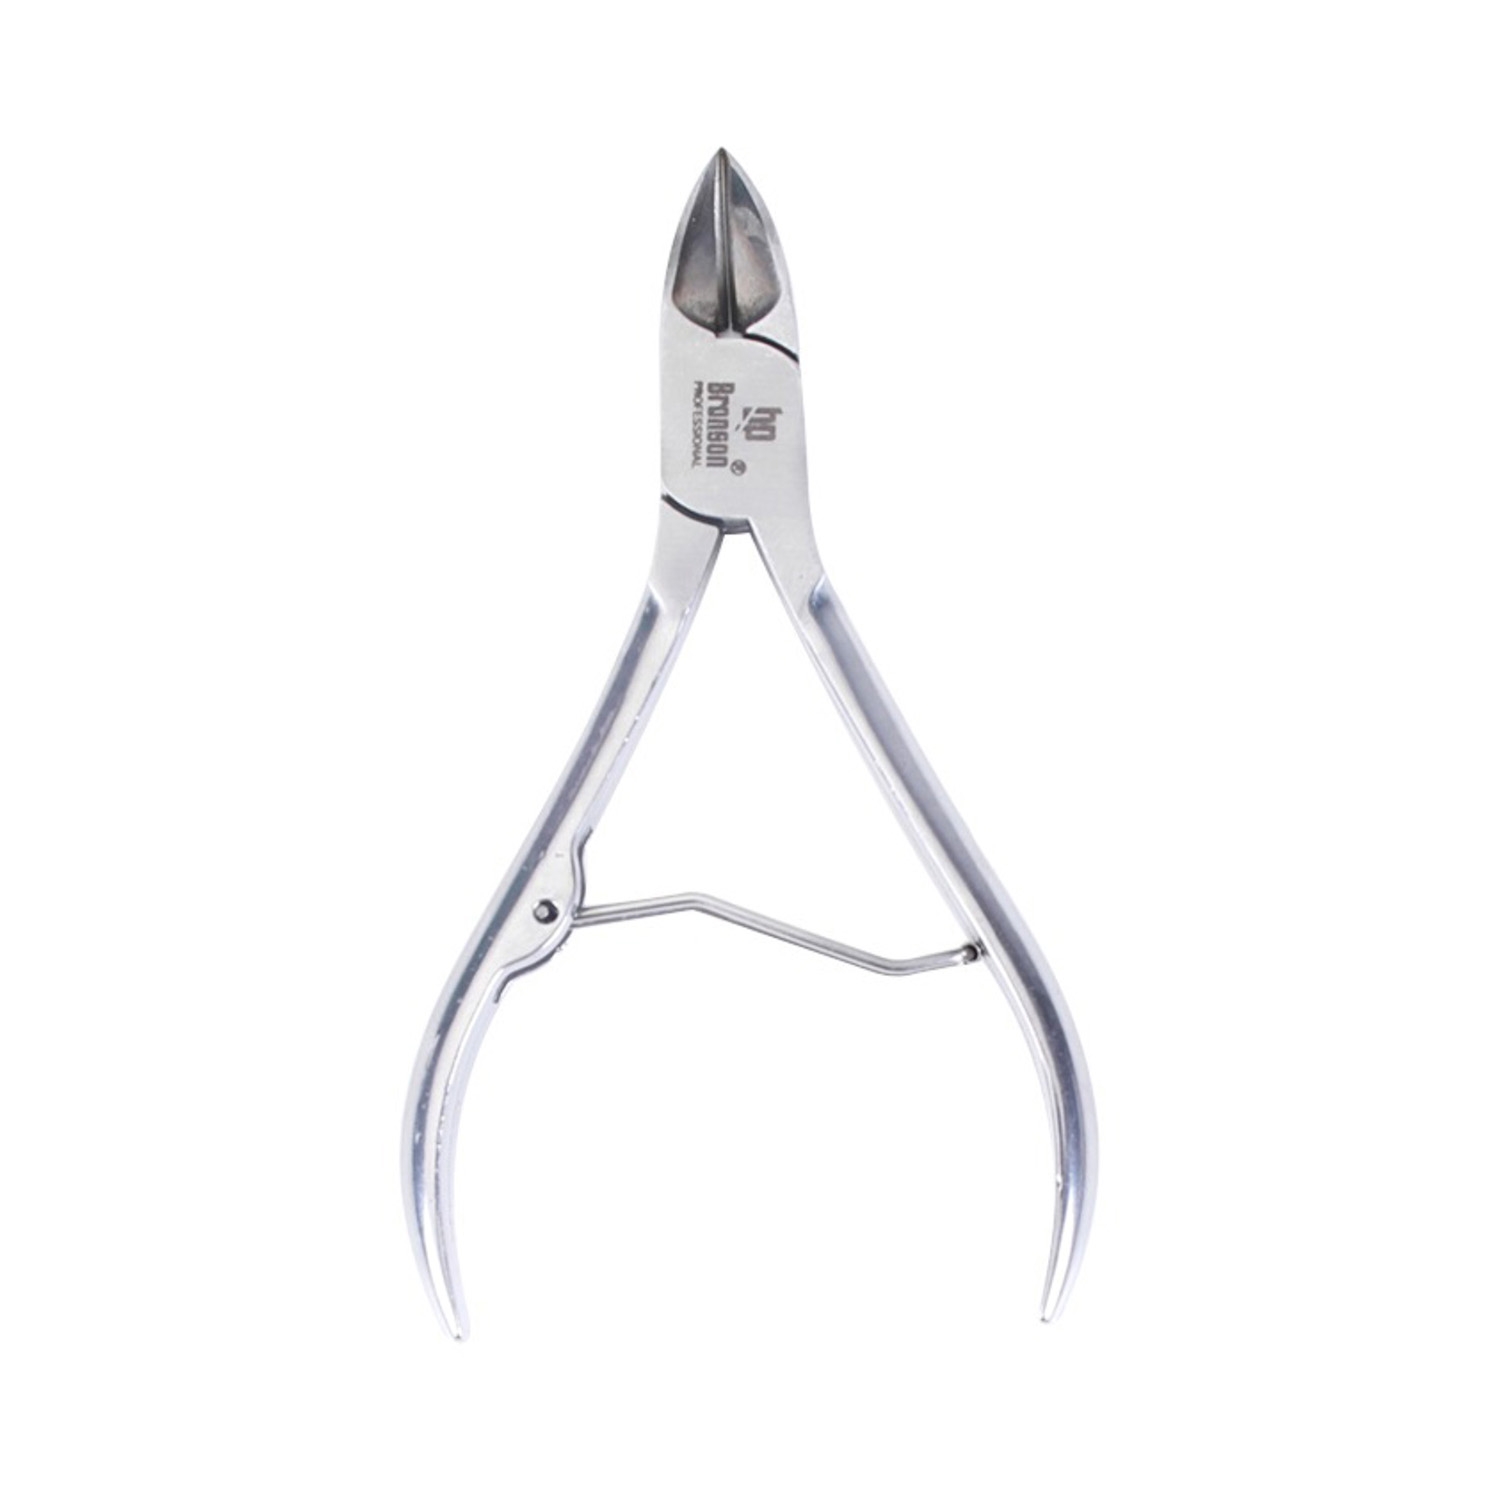 Bronson Professional | Bronson Professional Cuticle Remover/Nail Cutter Clippers with Super Sharp Curved Blade - Silver (1Pc)